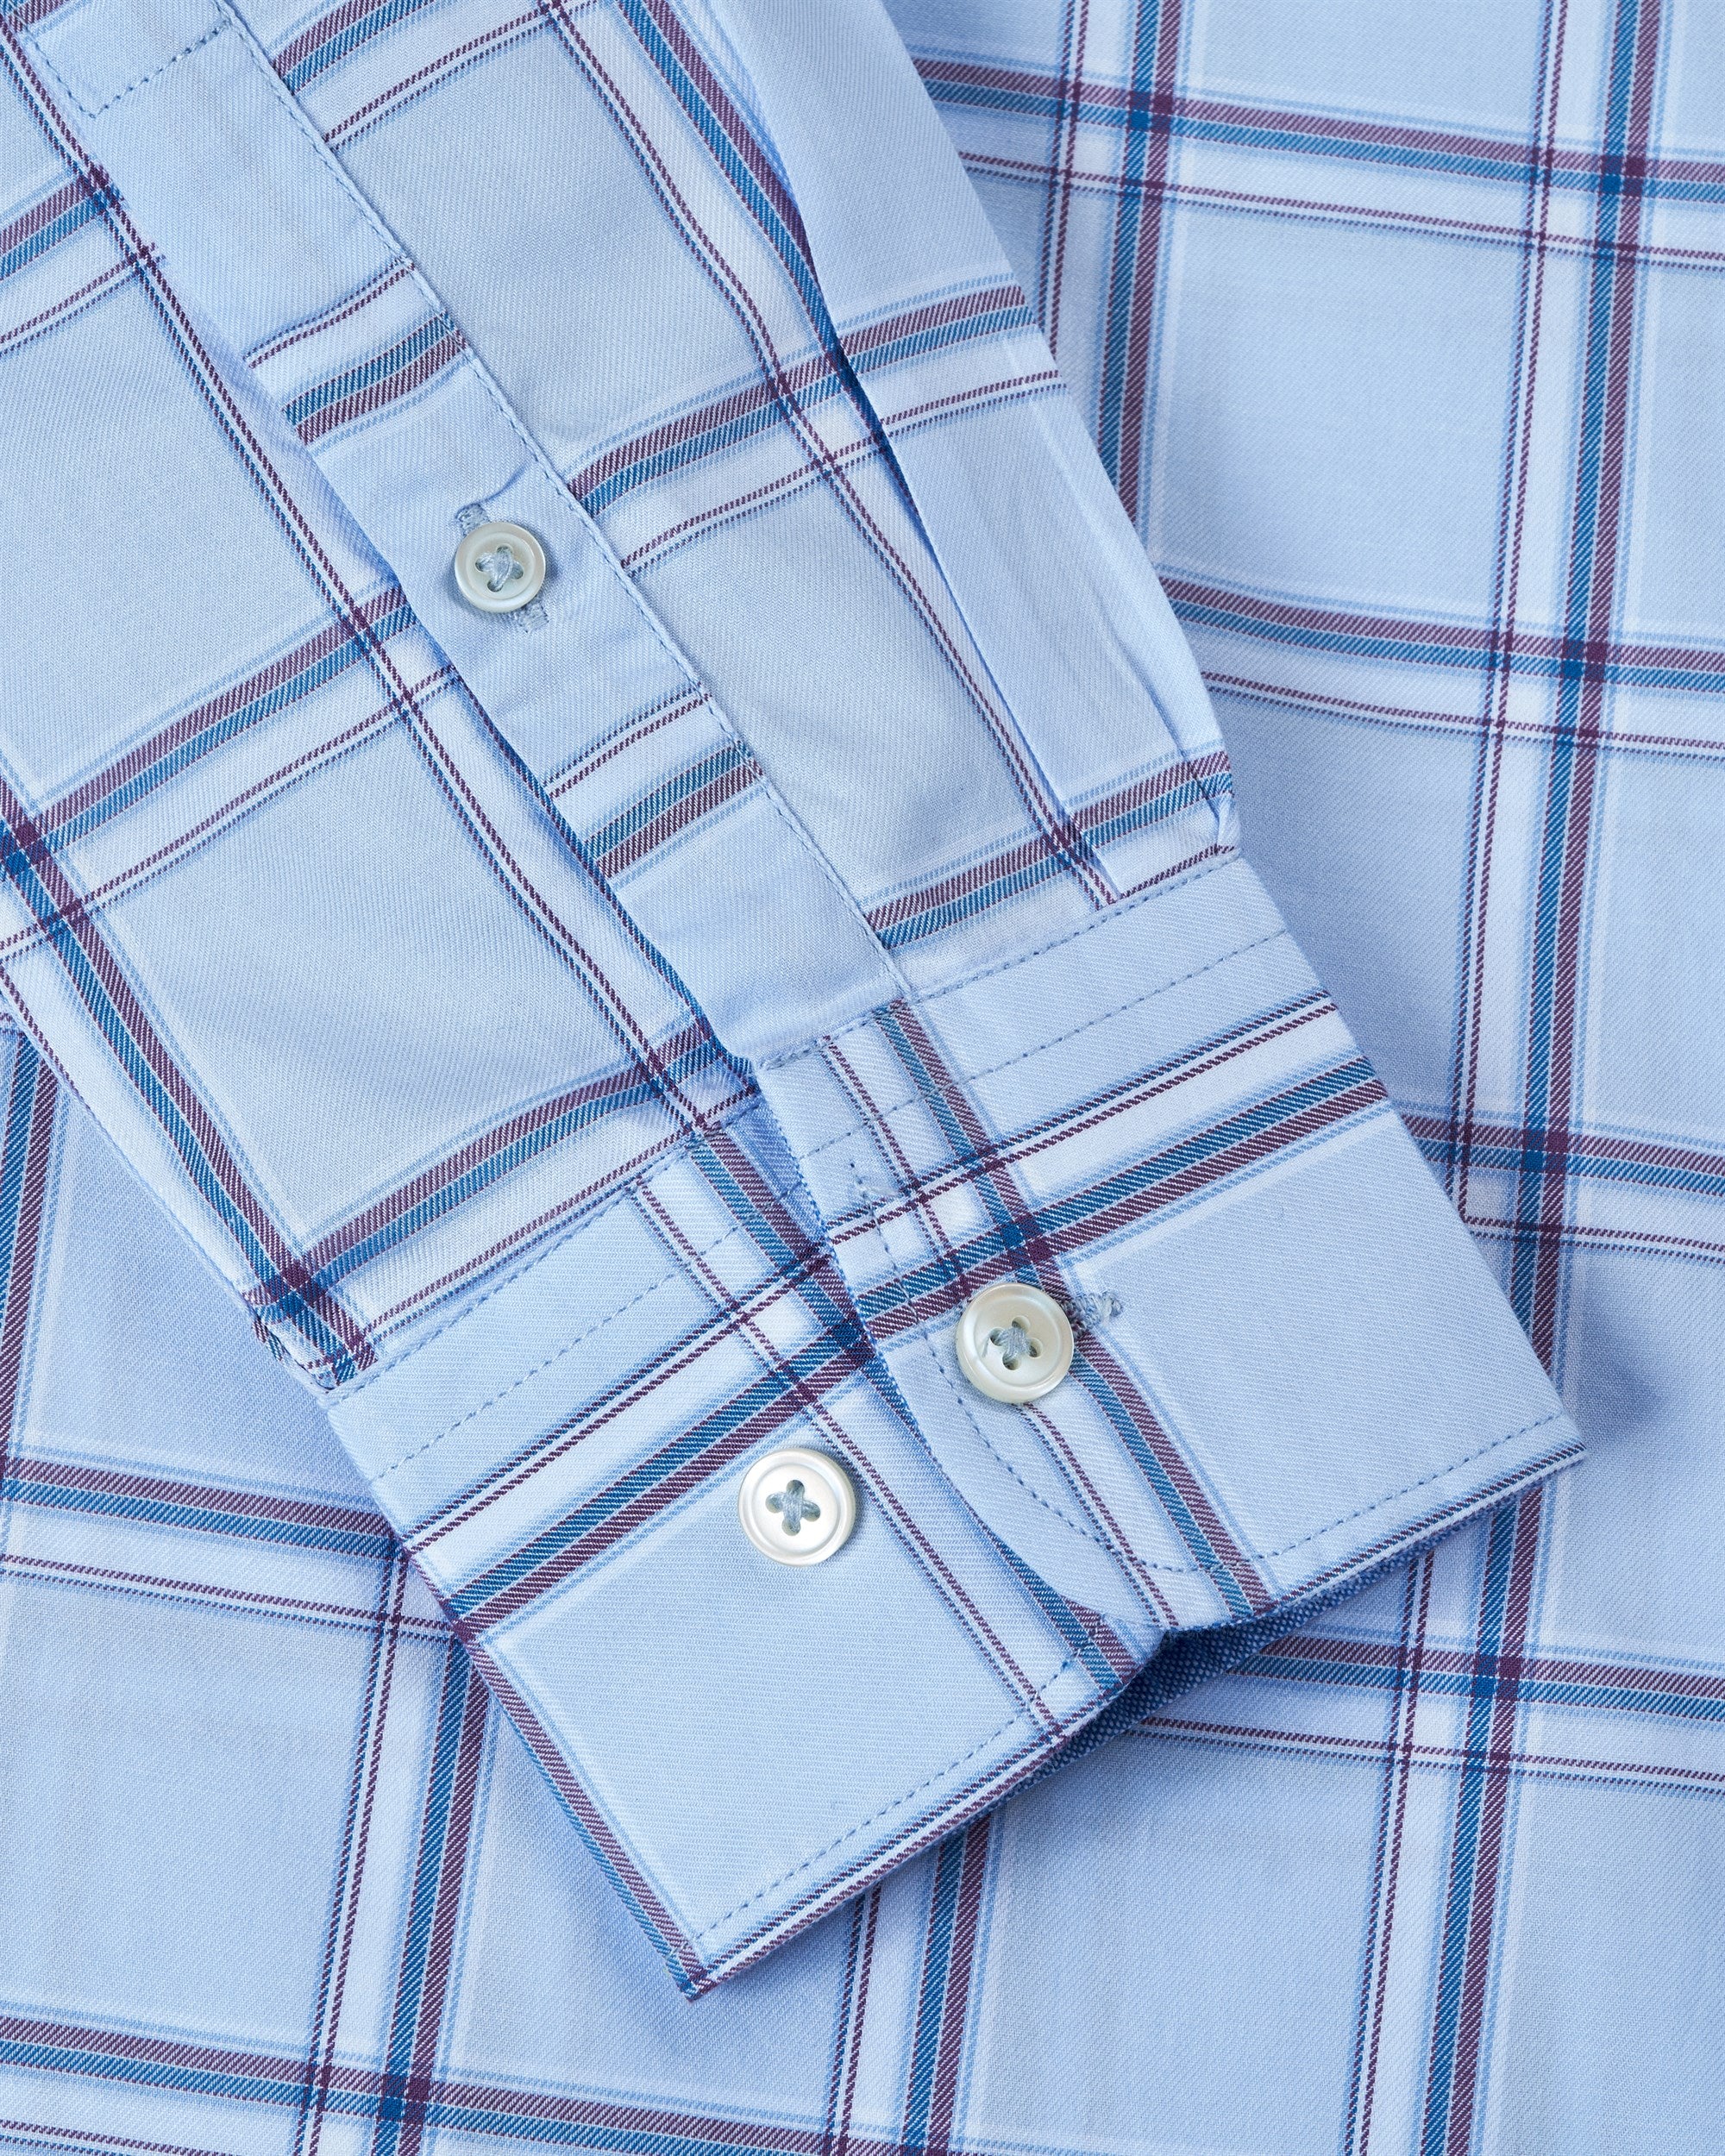 Bare Brown Buttondown Collar Cotton Checked Shirt, Slim Fit with Full Sleeves - Sky Blue